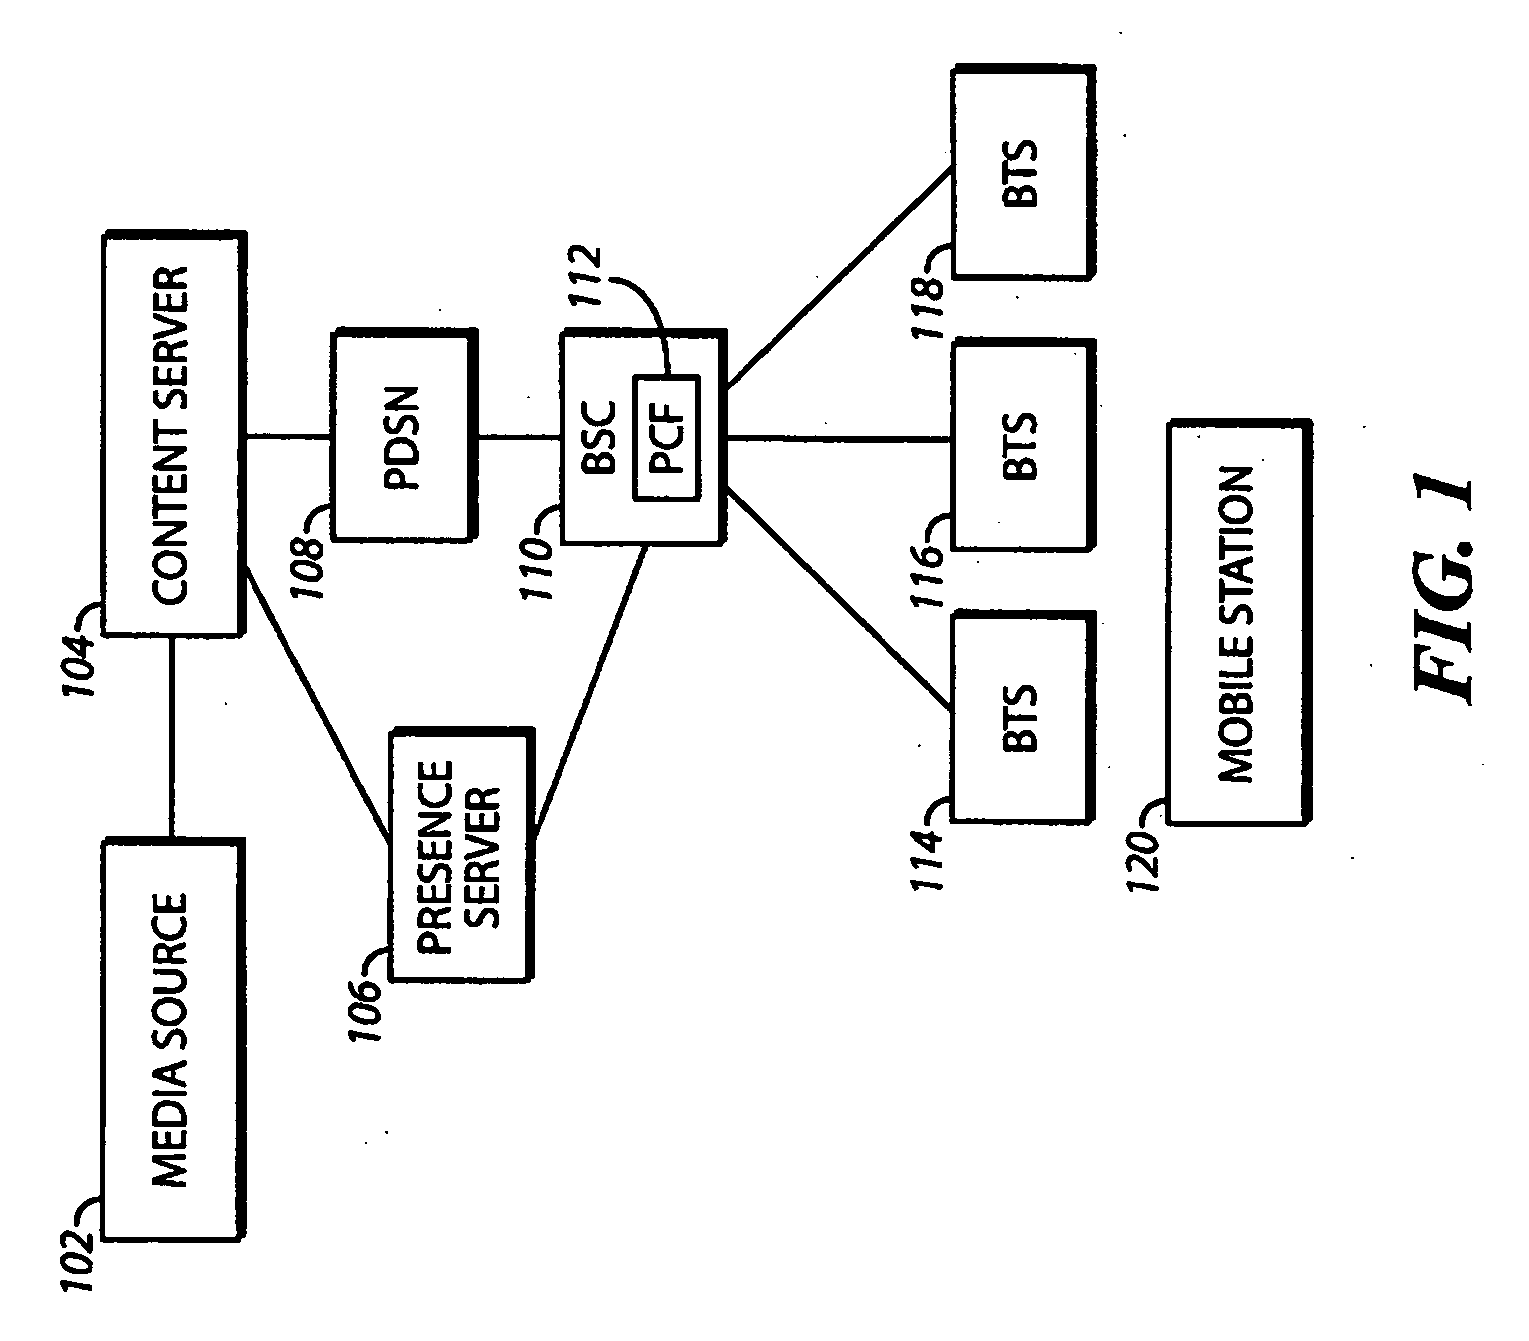 System and method for improving the capacity of a network